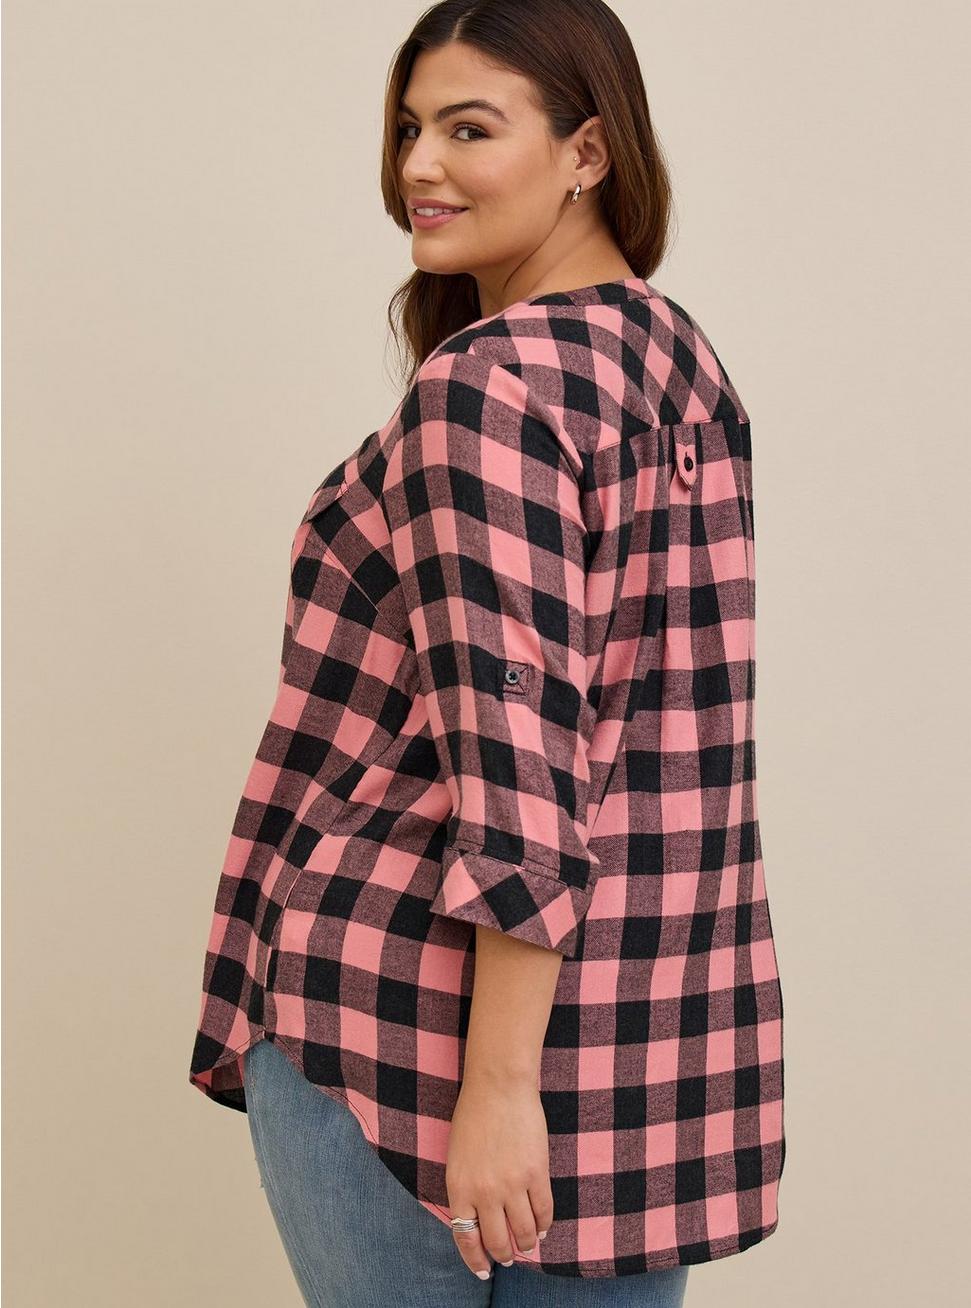 Harper Brushed Rayon Pullover 3/4 Sleeve Tunic Blouse, PLAID PINK, alternate